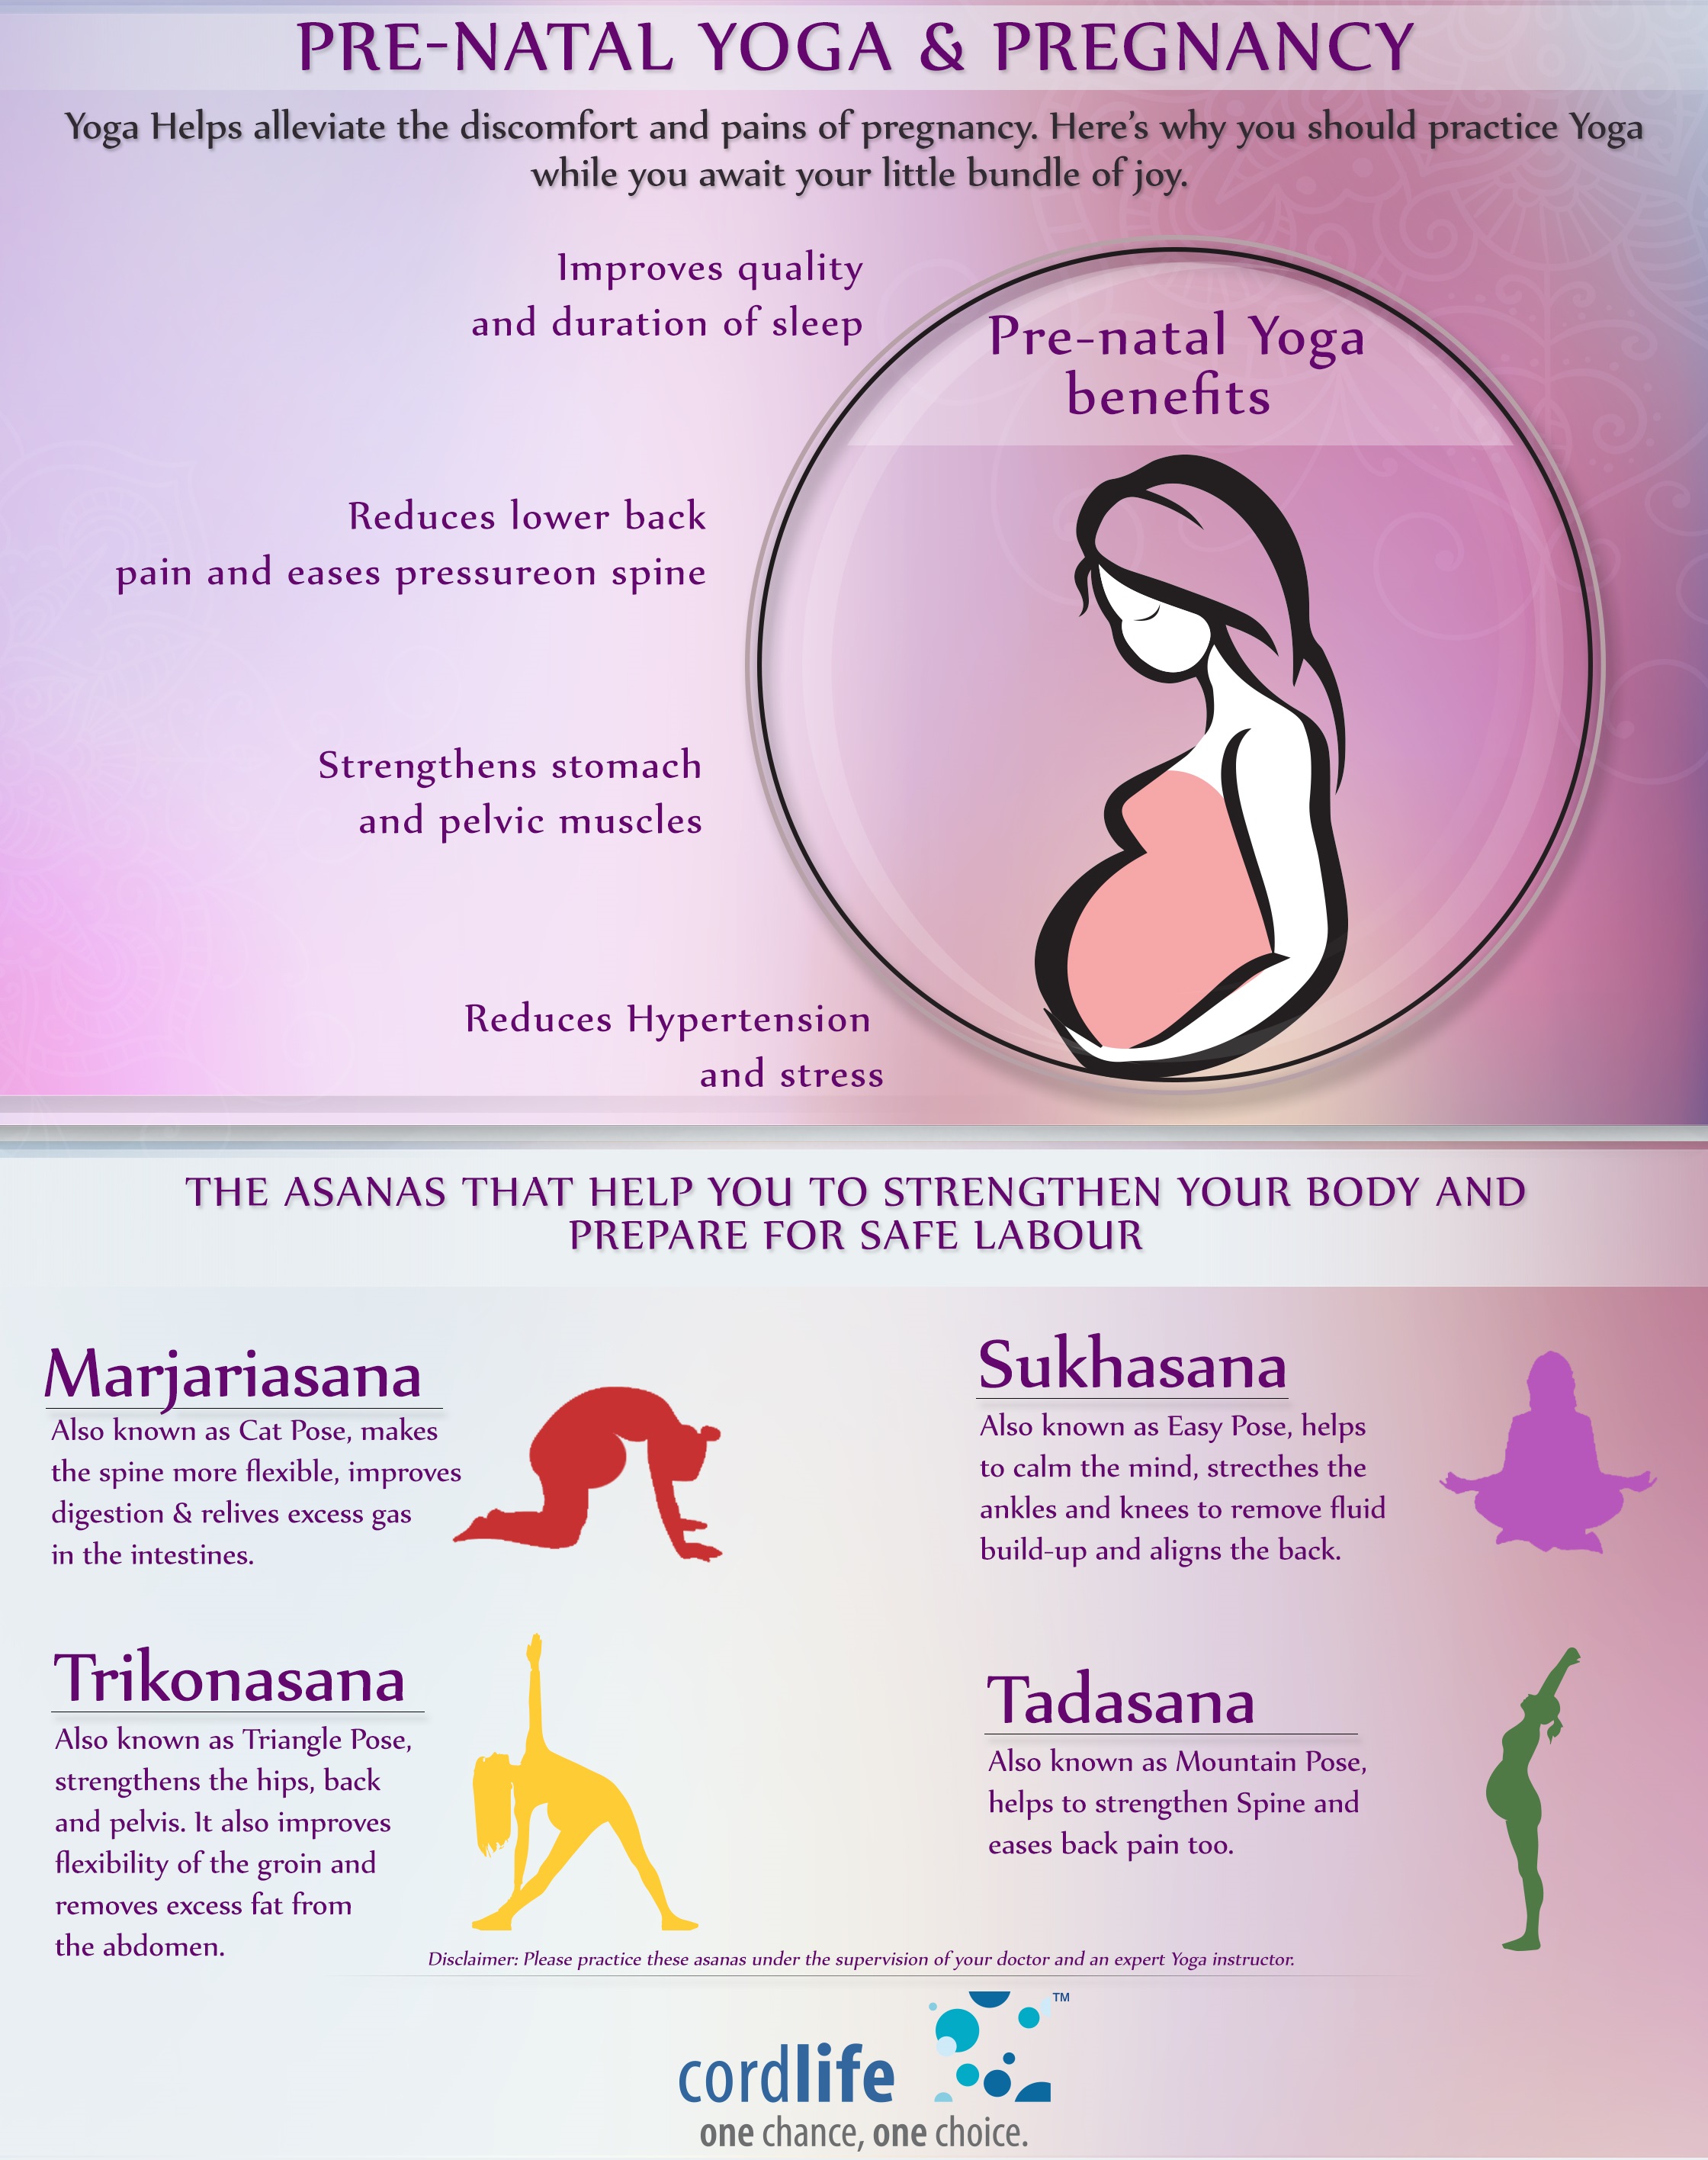 5 Yoga Poses For a Happy Pregnancy| Asanas For Strong, Healthy, and Safe  Pregnancy - Retreats For Me -Yoga Teacher Training Courses